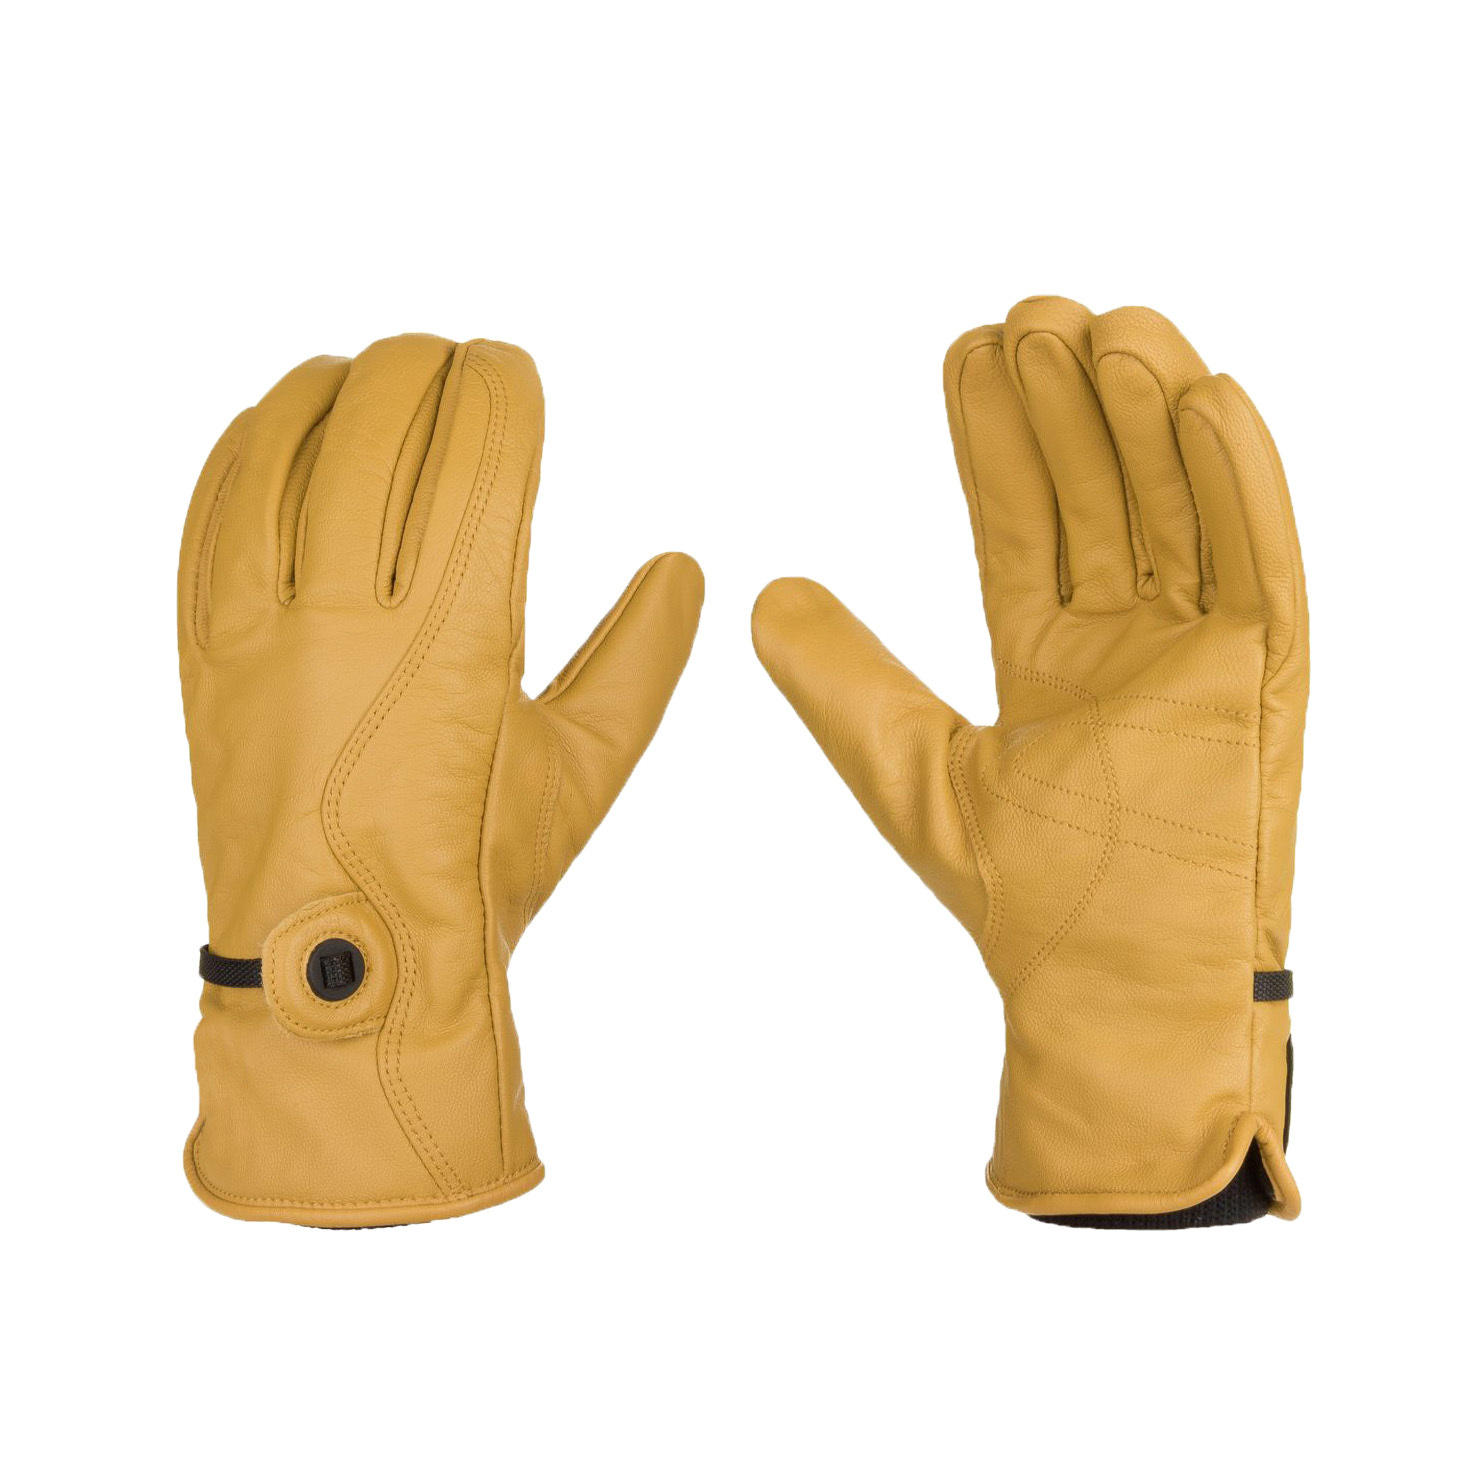 Yellow Leather Safety Gloves Welding Heat and Cut Resistance Working Glove Hand Protective